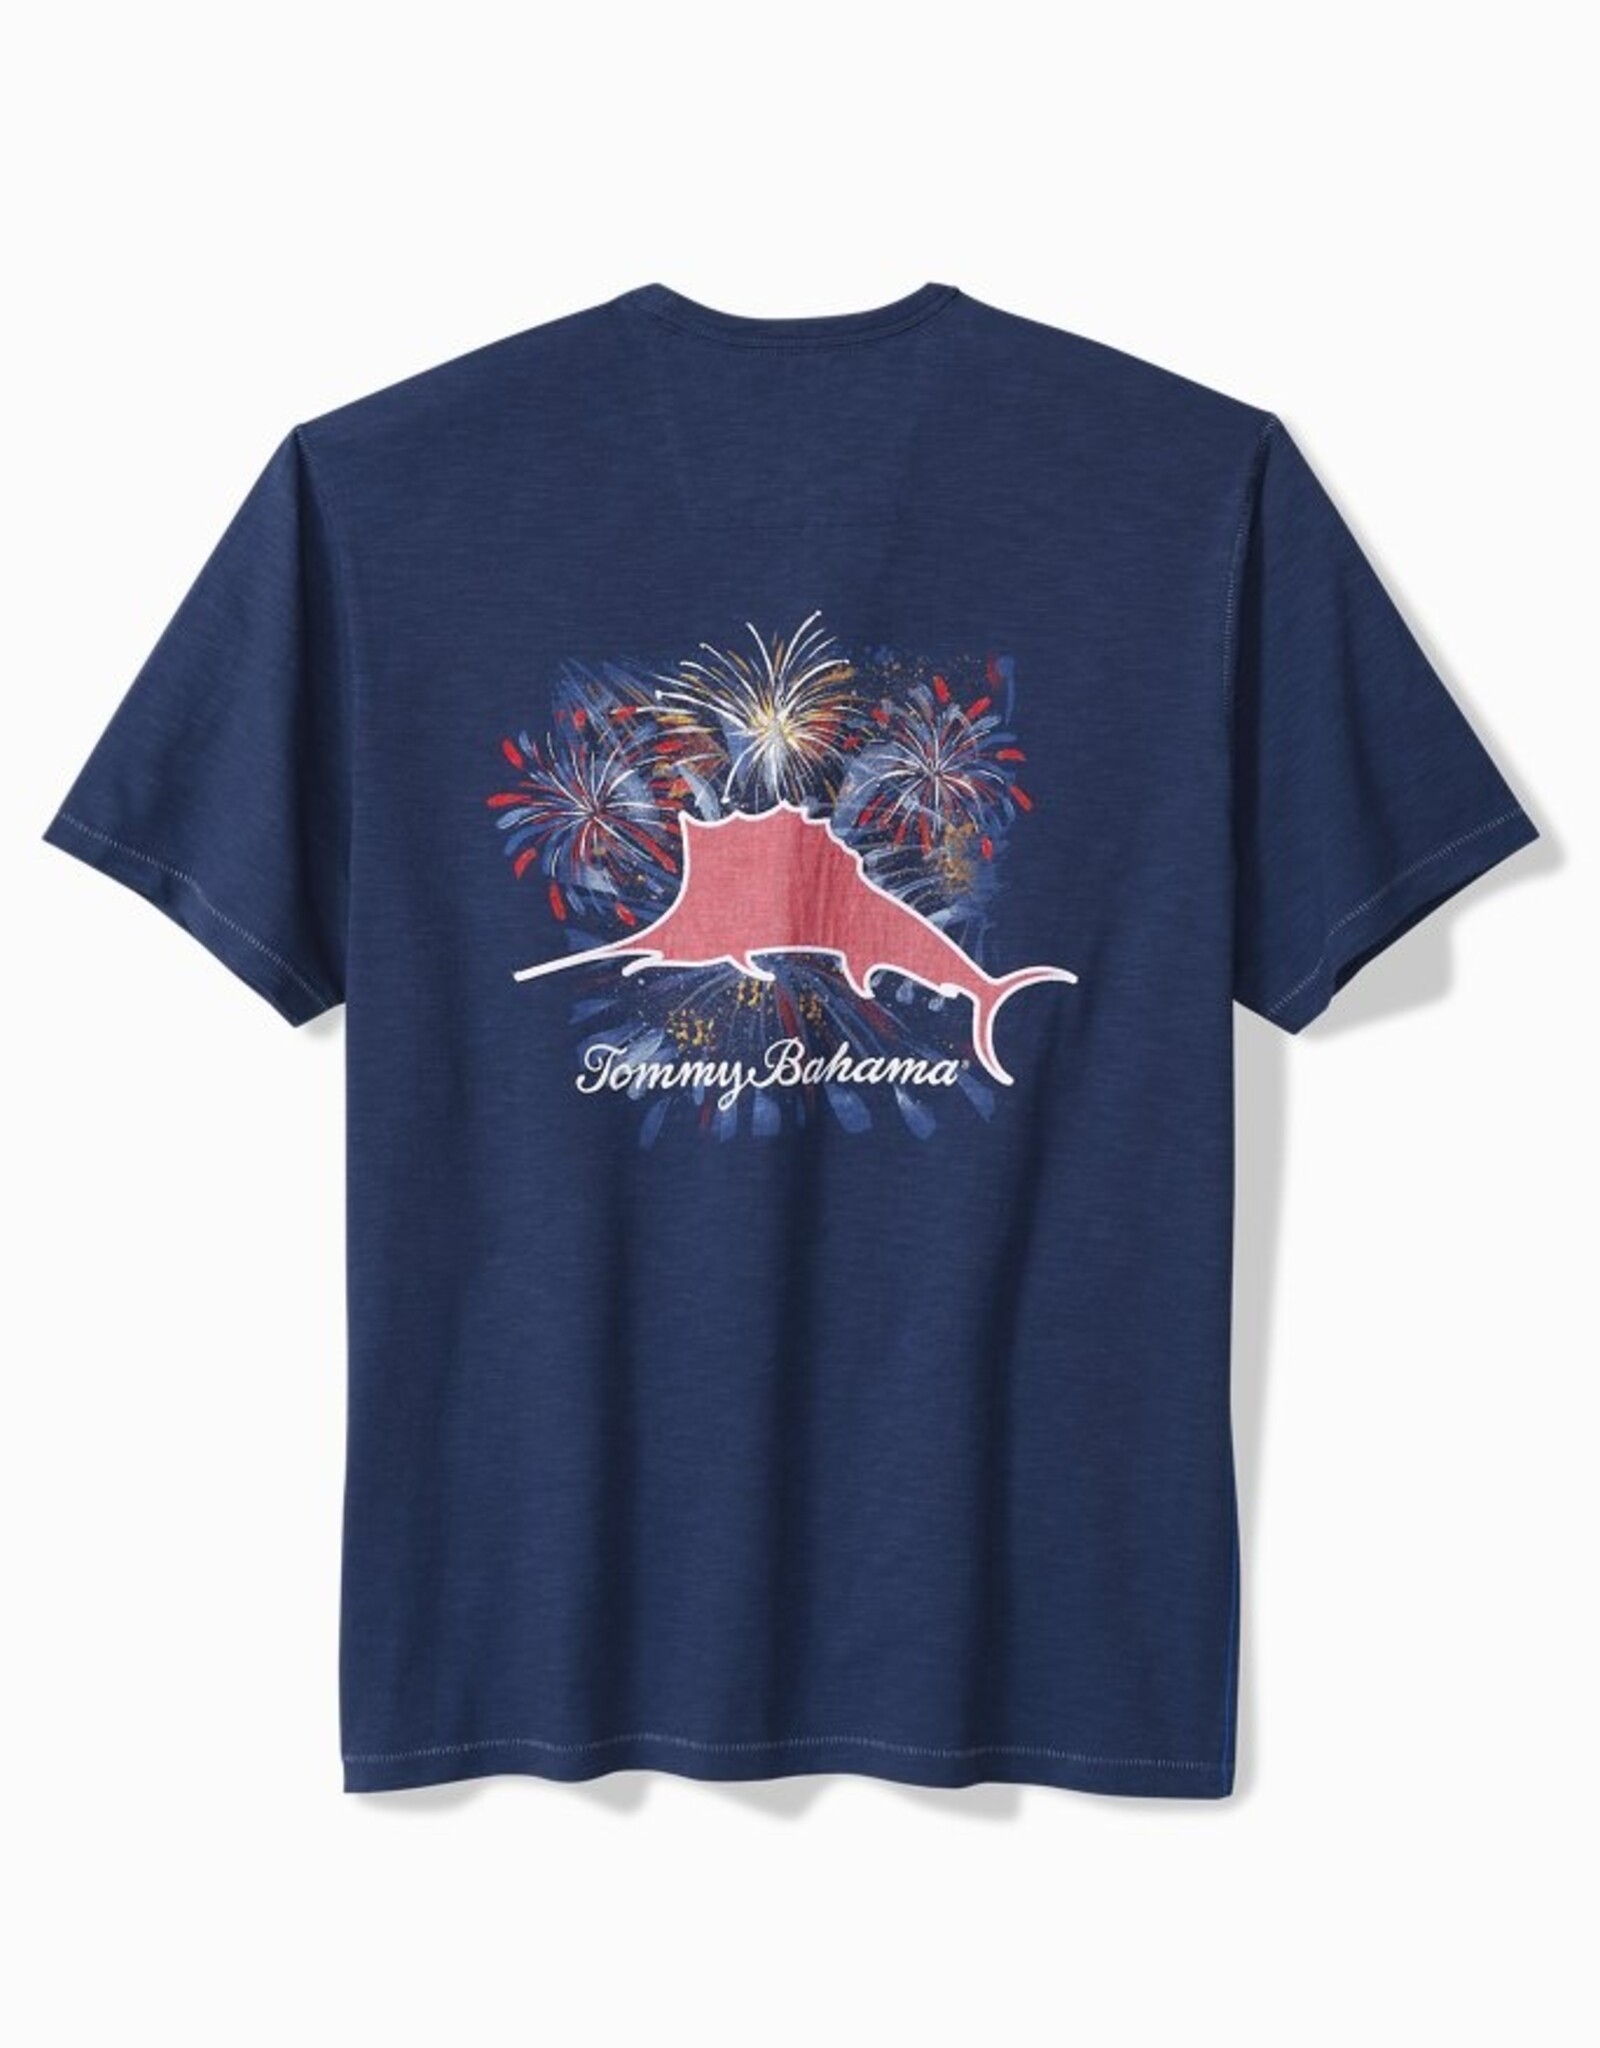 Tommy Bahama Red, White and Marlin Lux Tee